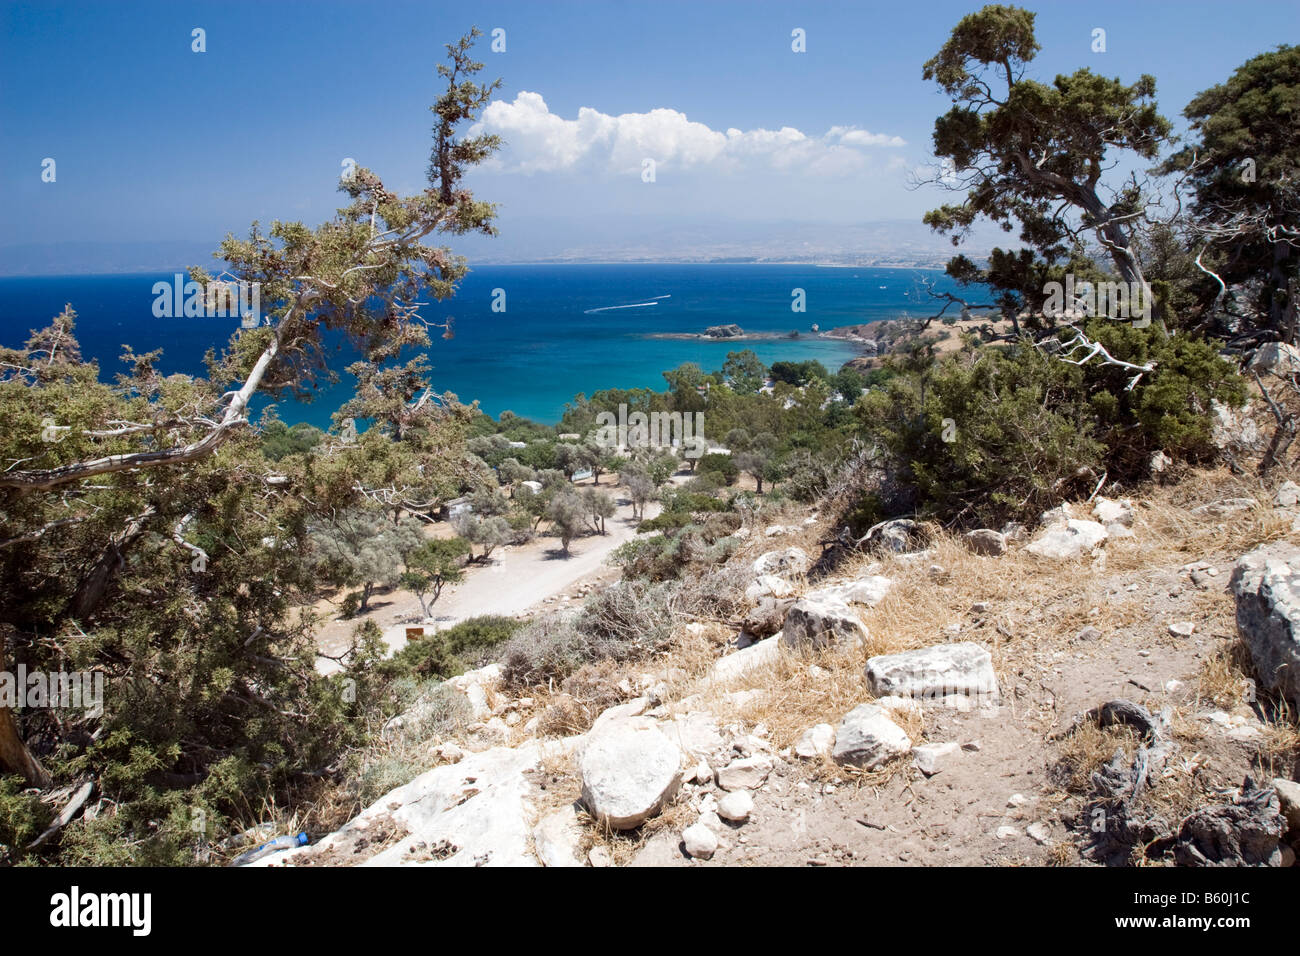 Seascape view from the hill in park near Aphrodite bath Cyprus Stock Photo